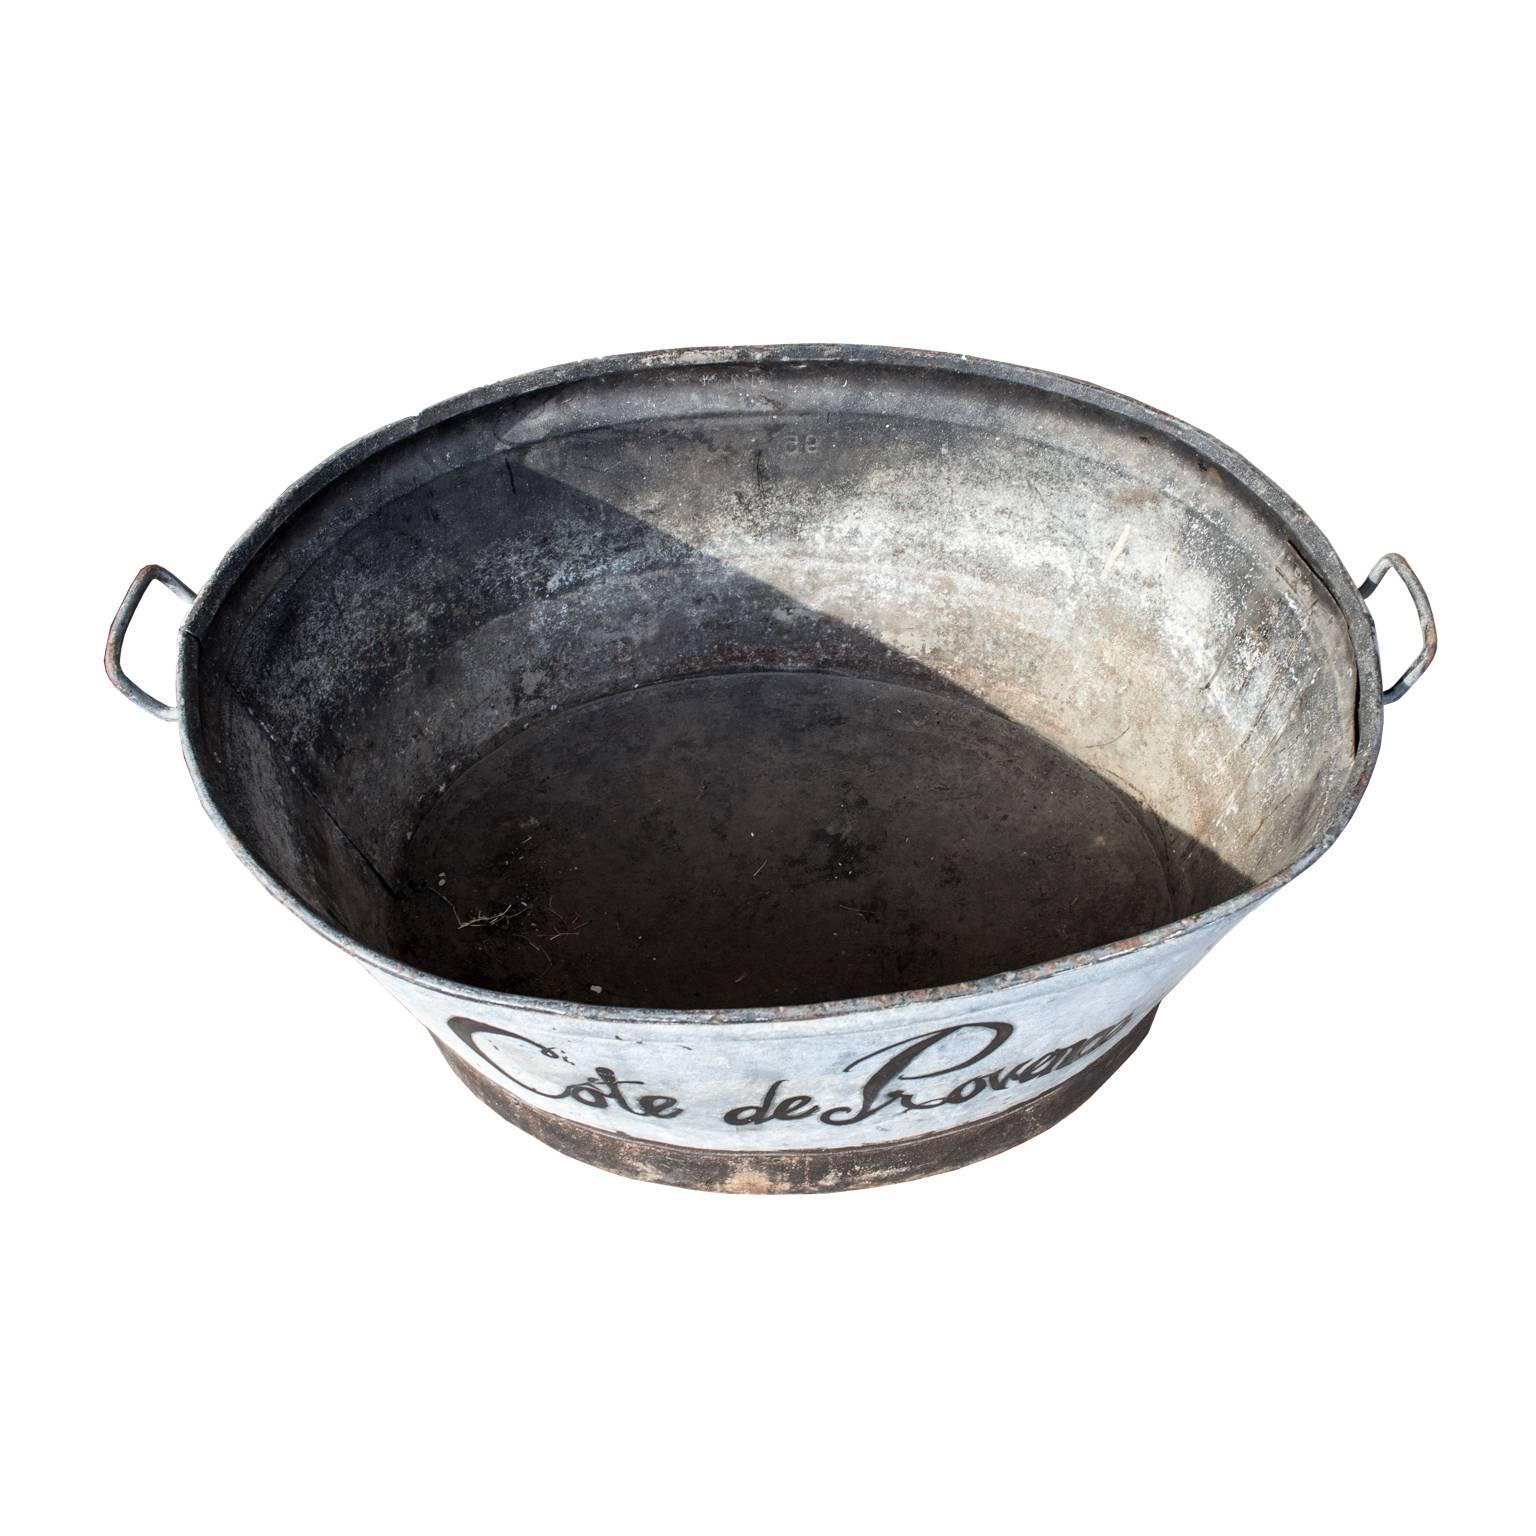 This oversized beauty of a zinc tub was discovered during our recent time in France and it's large-scale nature makes it excellent for corralling toys, blankets, firewood...or ice and vast amounts of wine for your next soiree.

Measures: 41